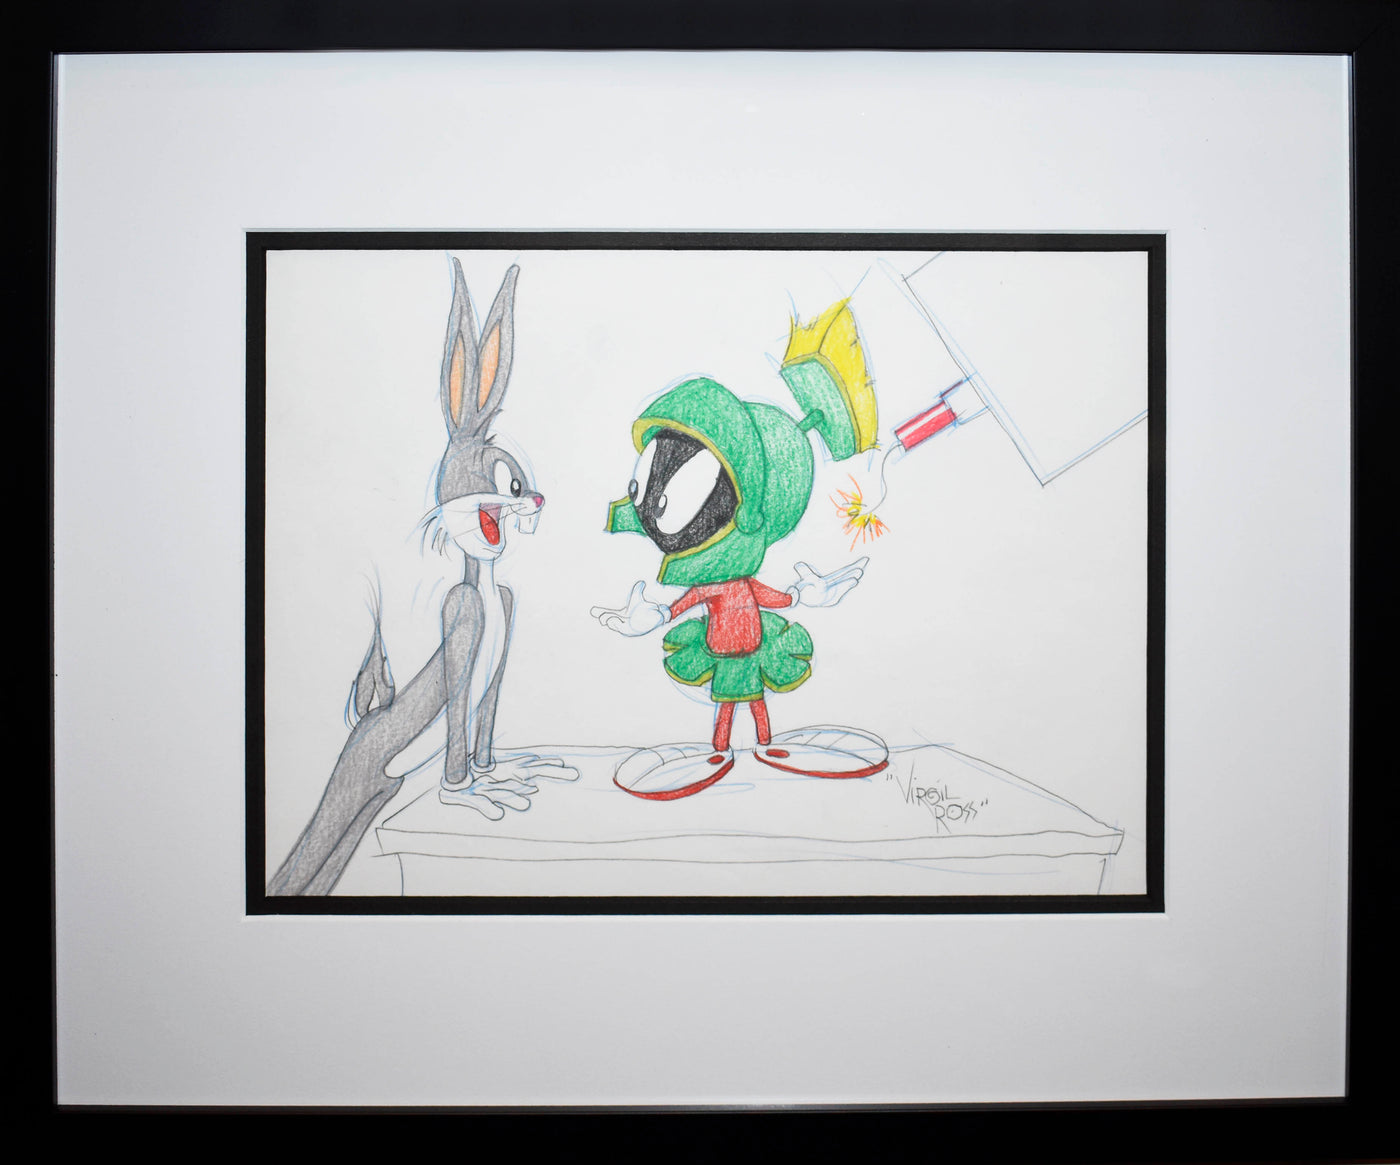 Warner Brothers Virgil Ross Animation Drawing of Bugs Bunny and Marvin the Martian